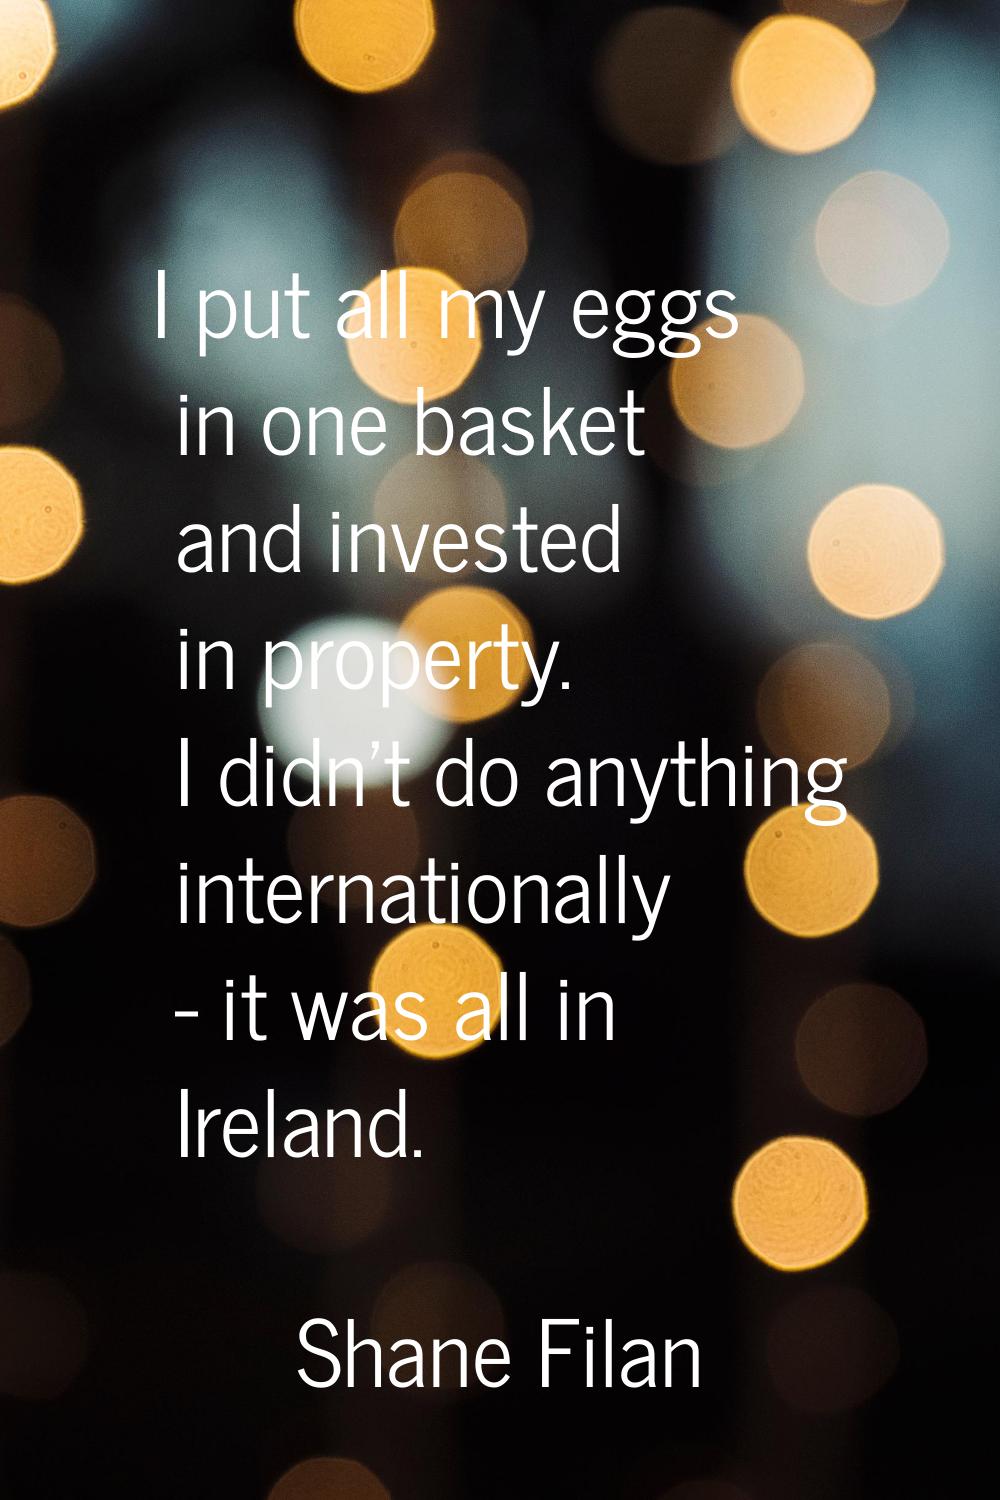 I put all my eggs in one basket and invested in property. I didn't do anything internationally - it